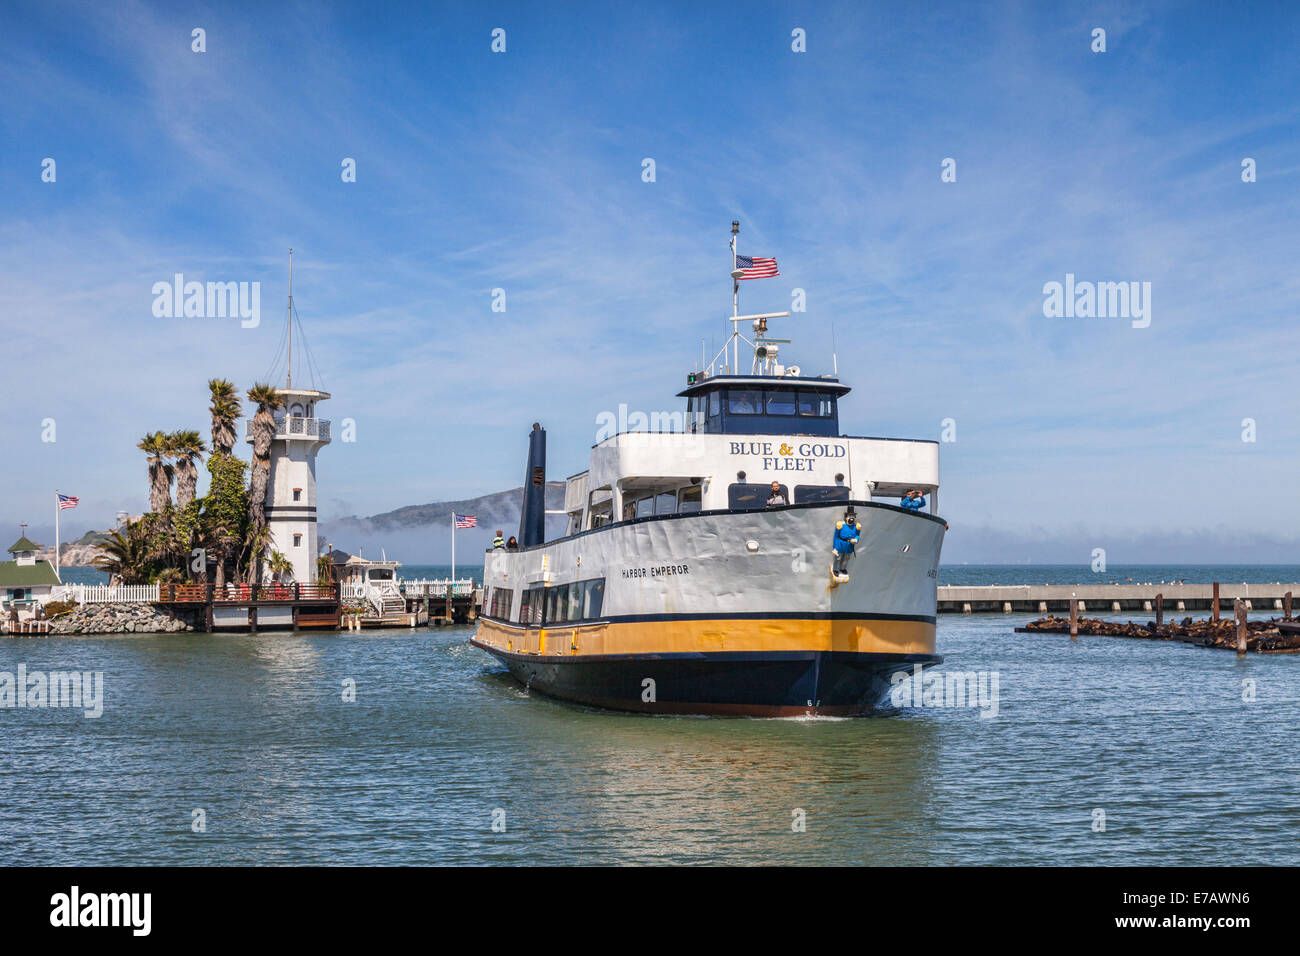 Cruise boat Harbor Emporor, of the Blue and Gold Fleet, returns to its berth in San Francisco Bay near Pier 39, passing between Stock Photo